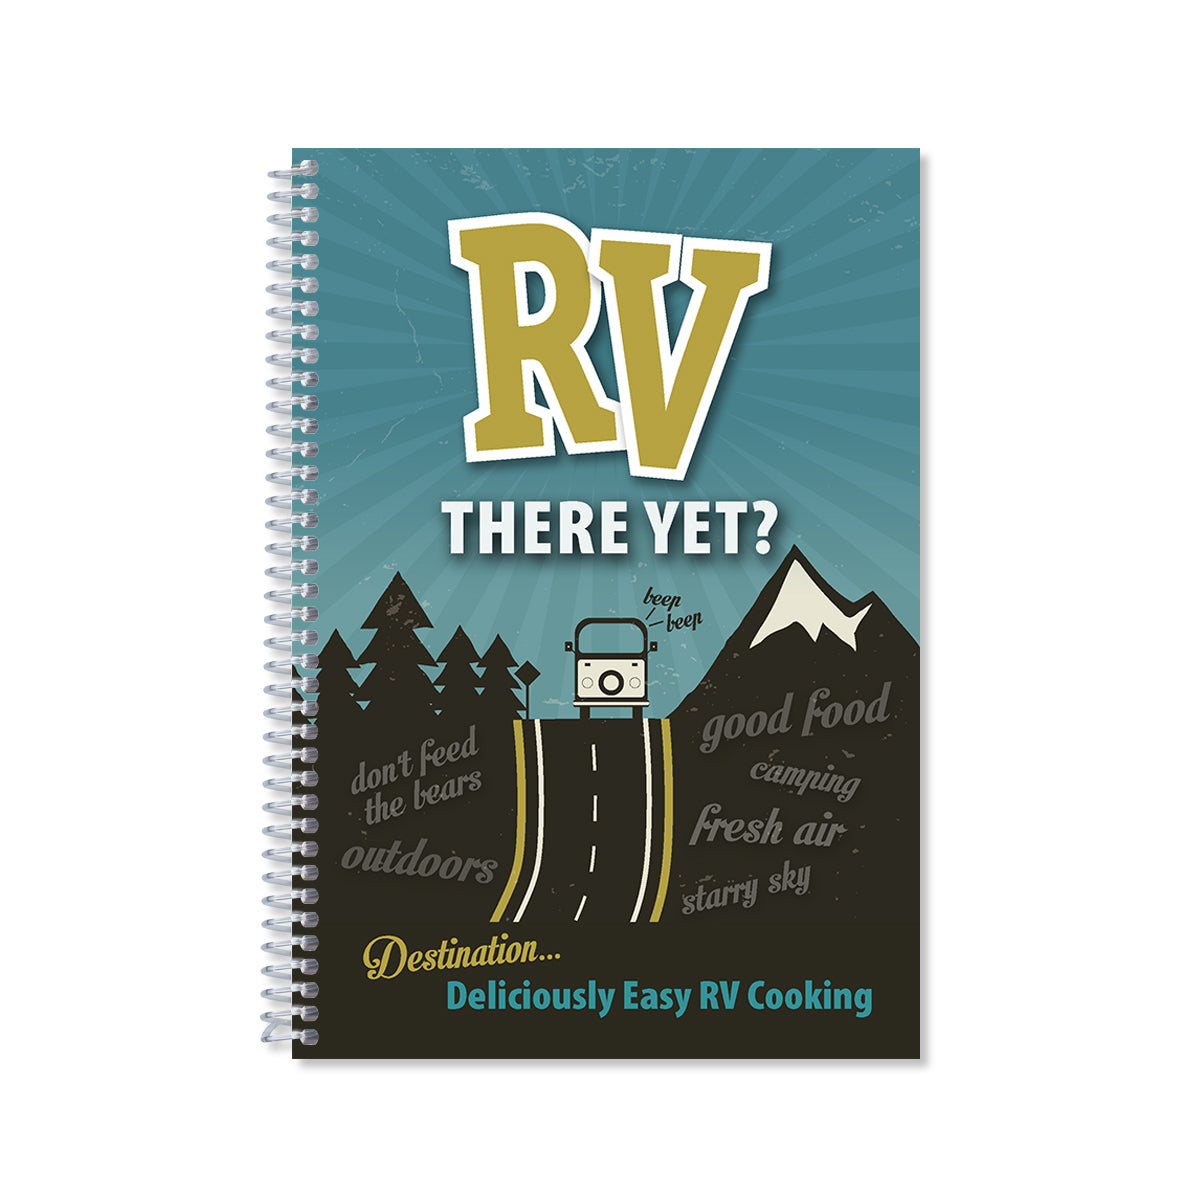 Blue and black book cover for RV There Yet? Destination, deliciously easy RV cooking.